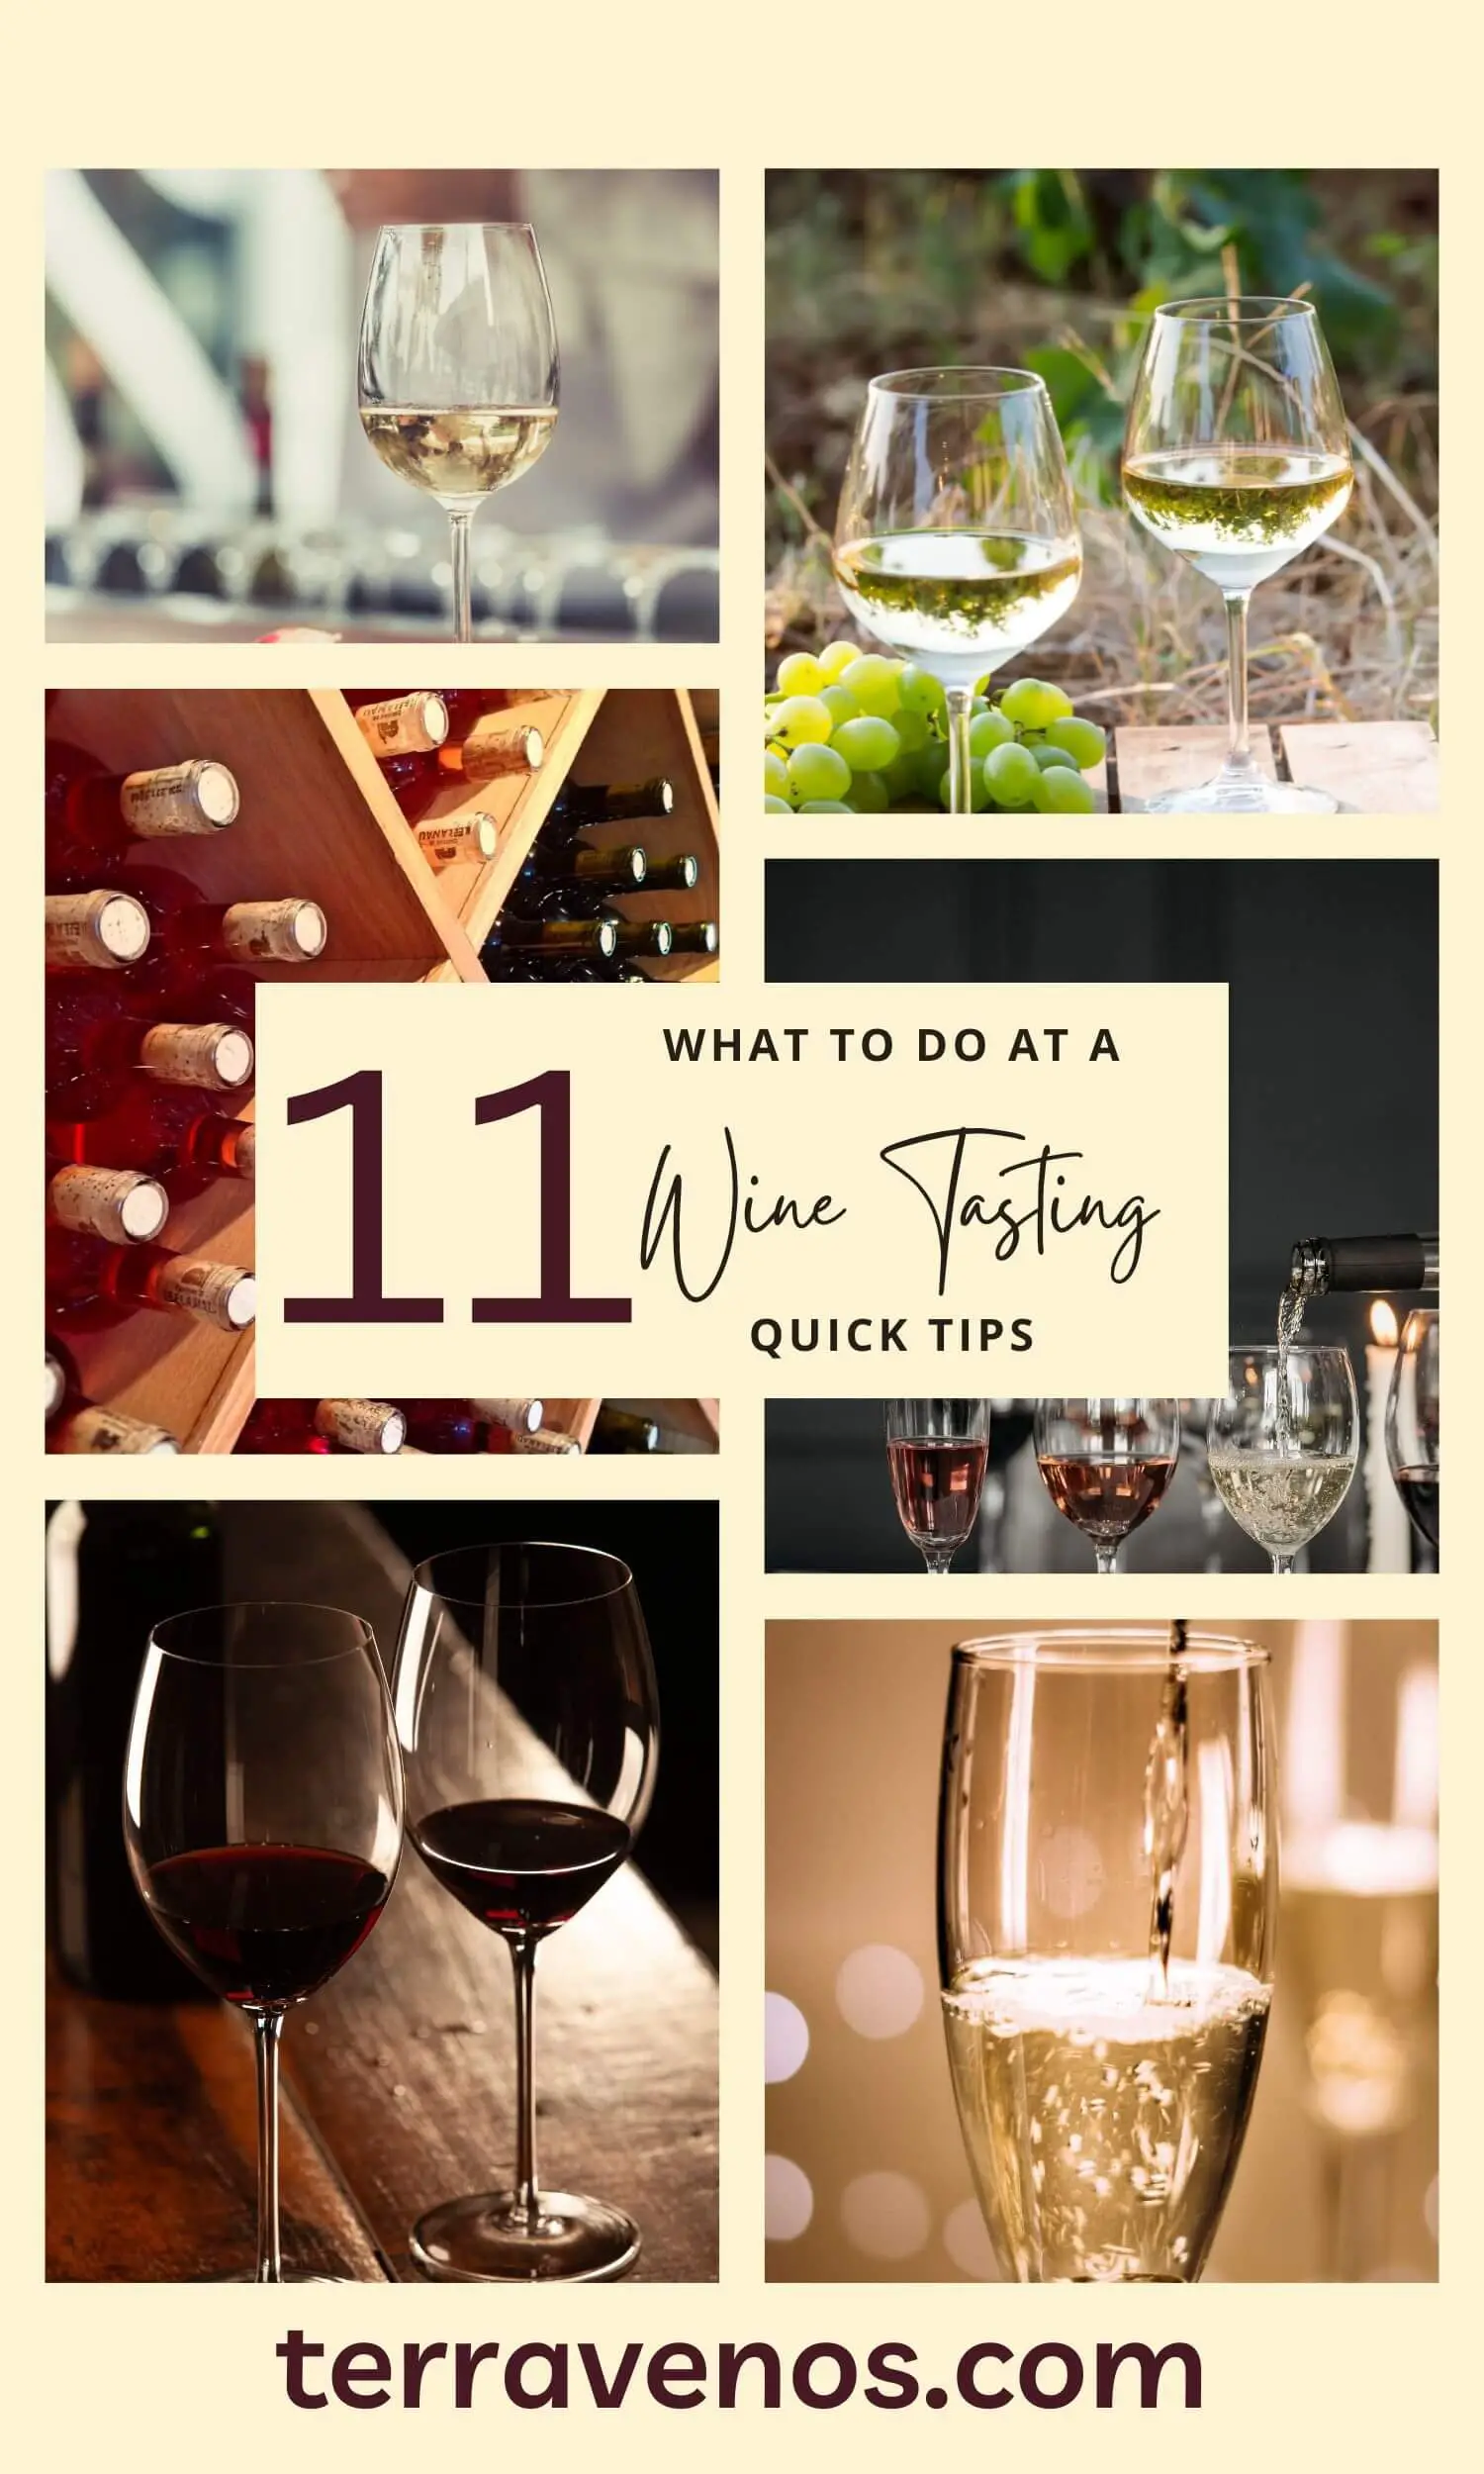 what-should-i-do-at-a-wine-tasting - what to do at a wine tasting